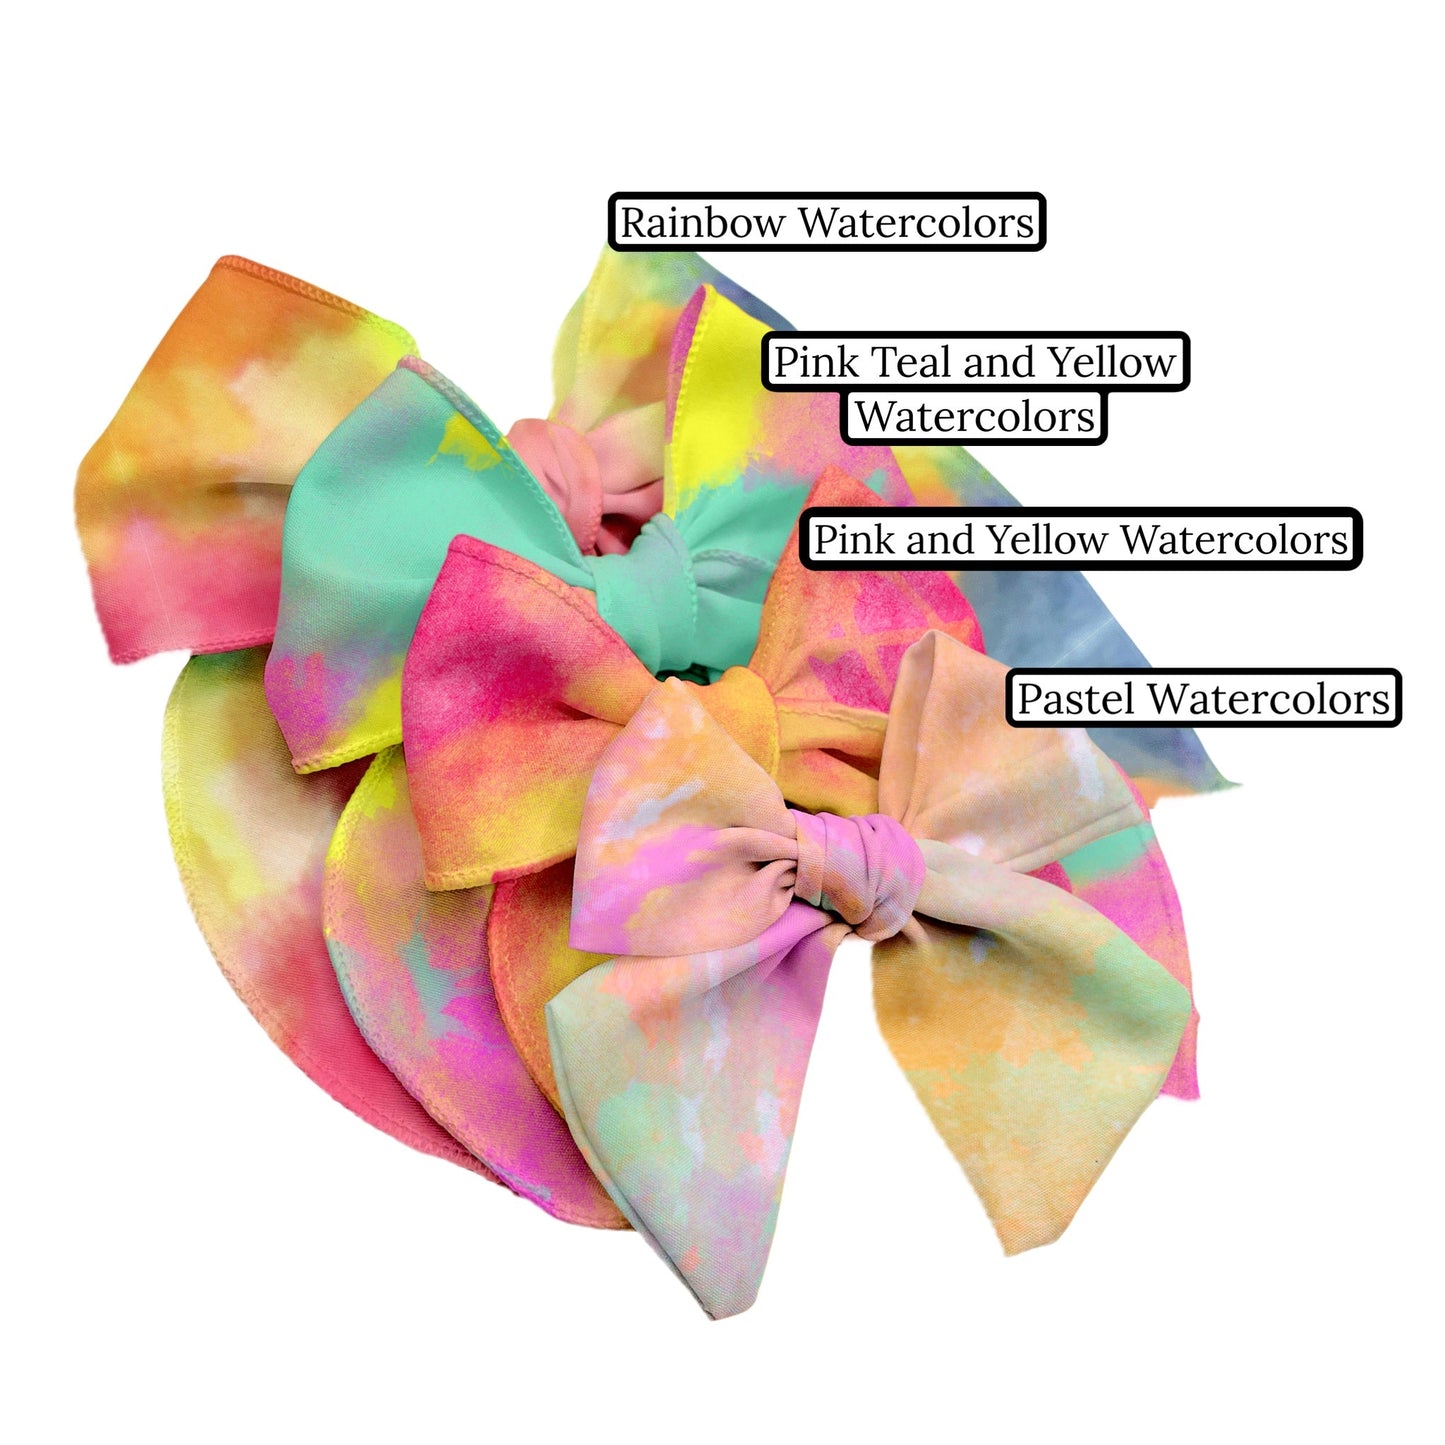 Pink Teal and Yellow Watercolors Hair Bow Strips